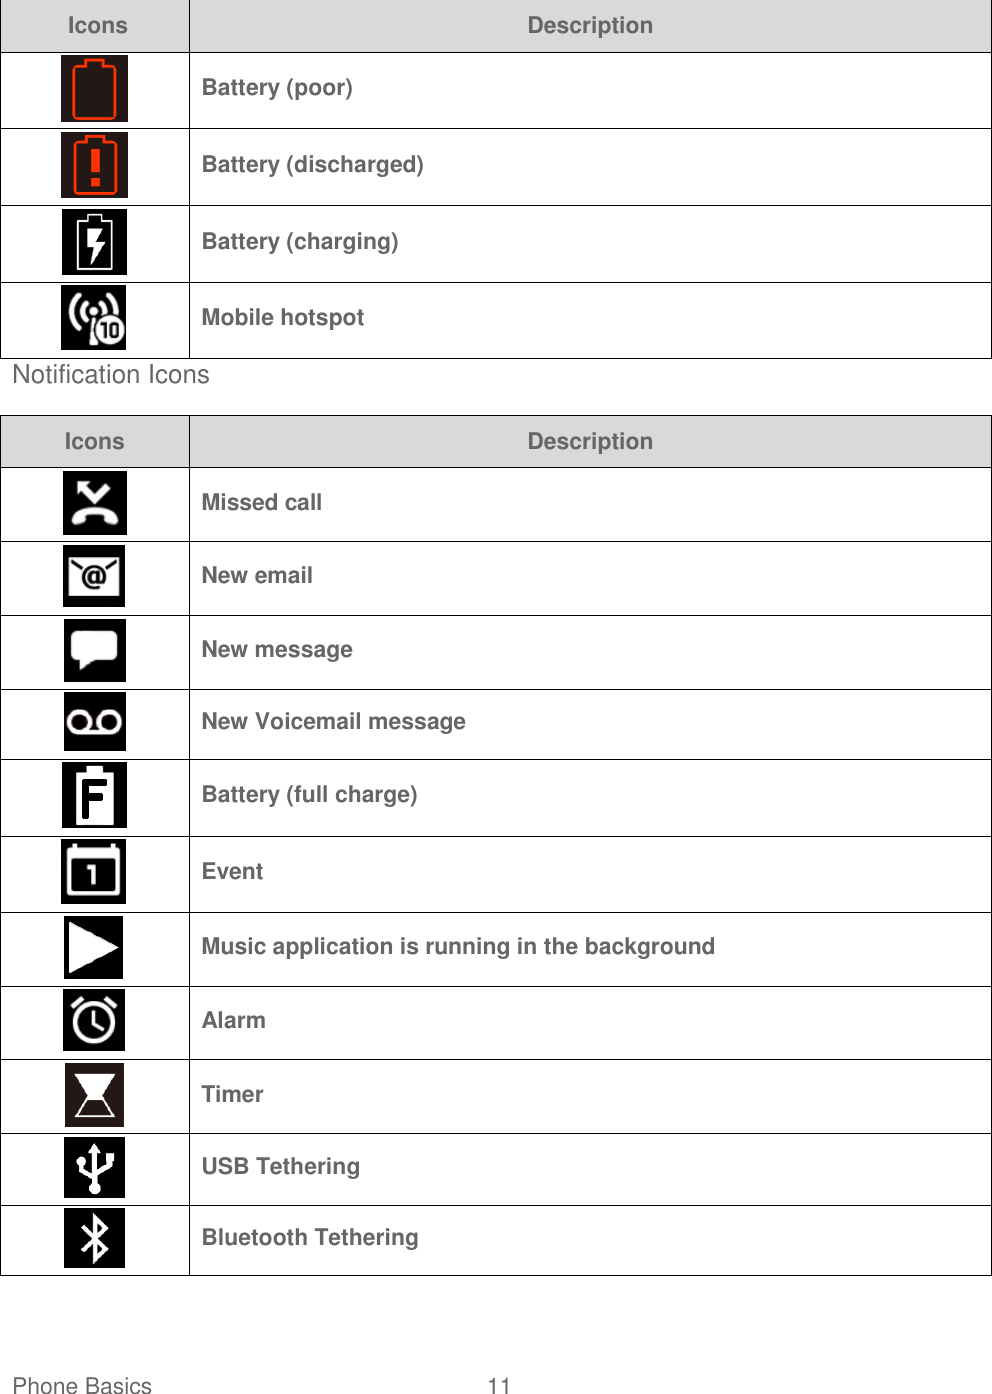 Phone Basics  11    Icons Description  Battery (poor)  Battery (discharged)  Battery (charging)  Mobile hotspot Notification Icons Icons Description  Missed call  New email  New message  New Voicemail message  Battery (full charge)  Event  Music application is running in the background  Alarm  Timer  USB Tethering  Bluetooth Tethering 